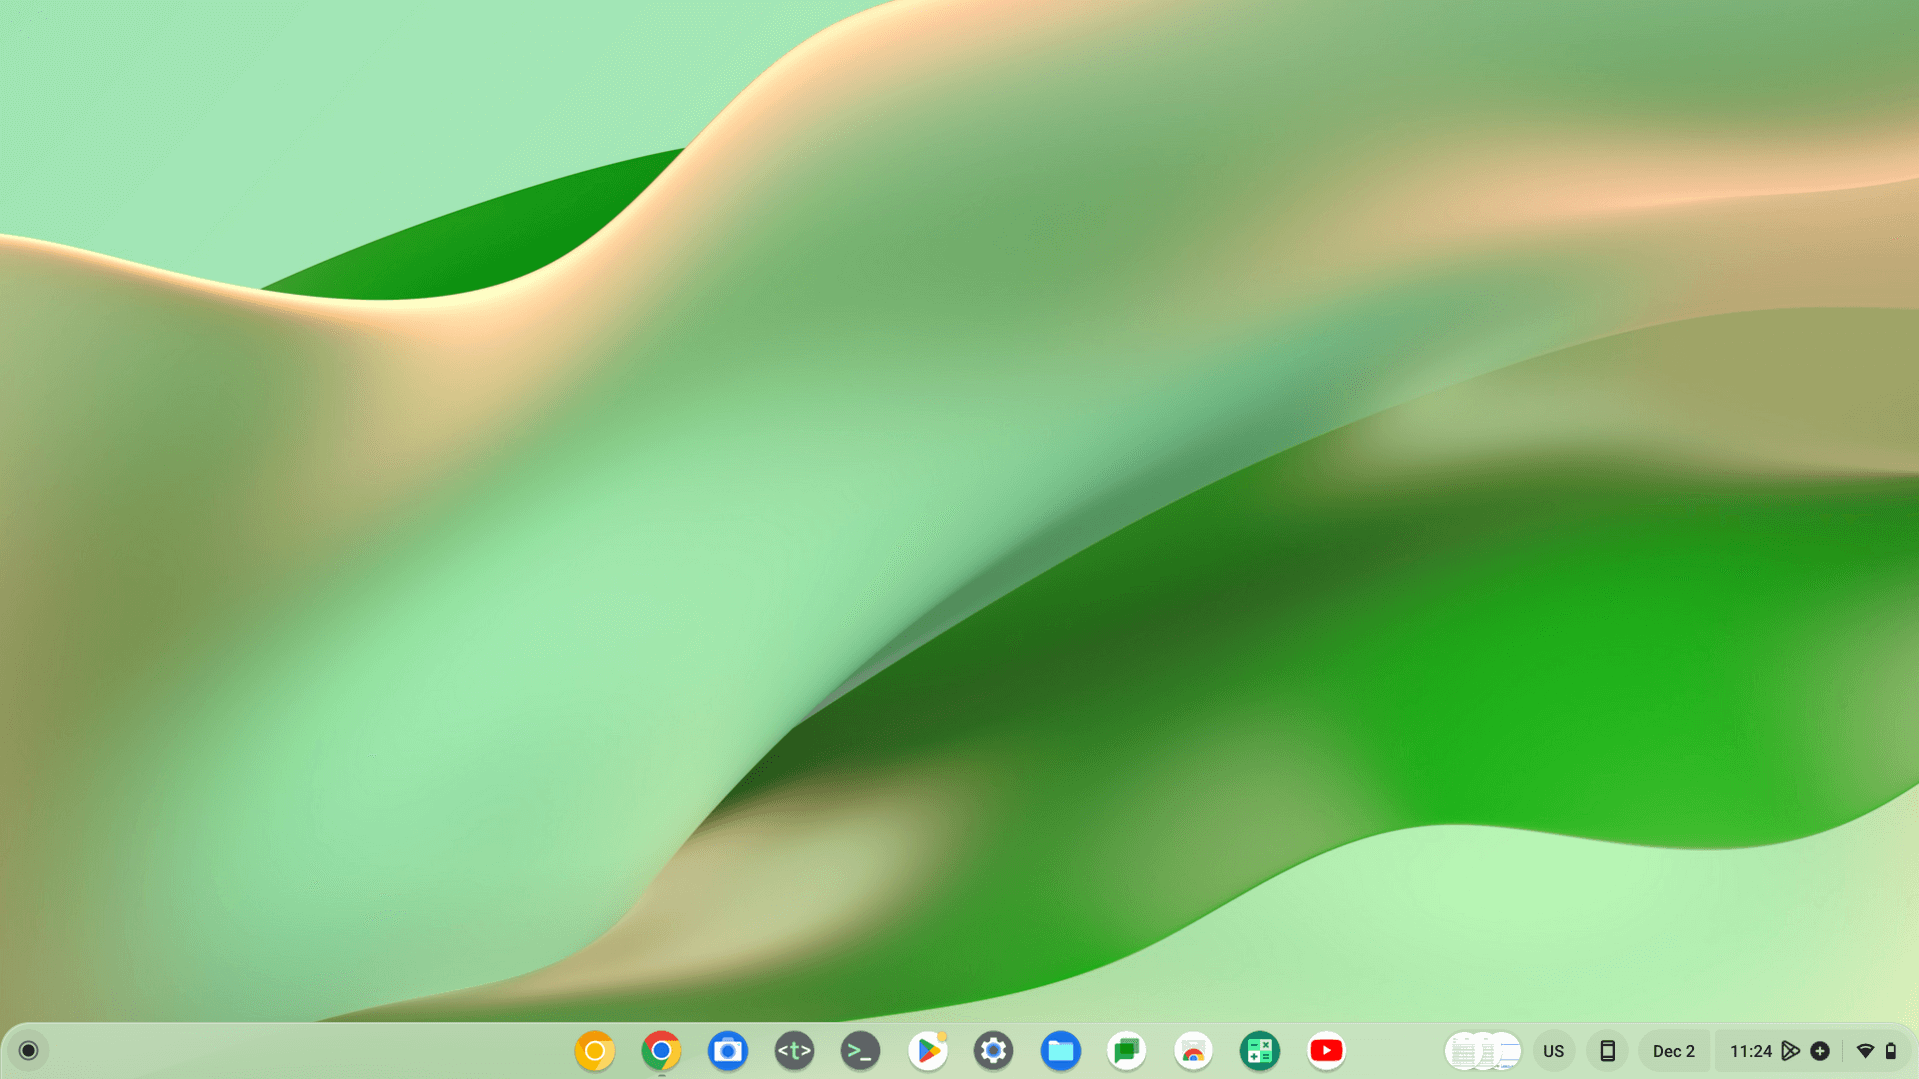 The ChromeOS home screen in 2022